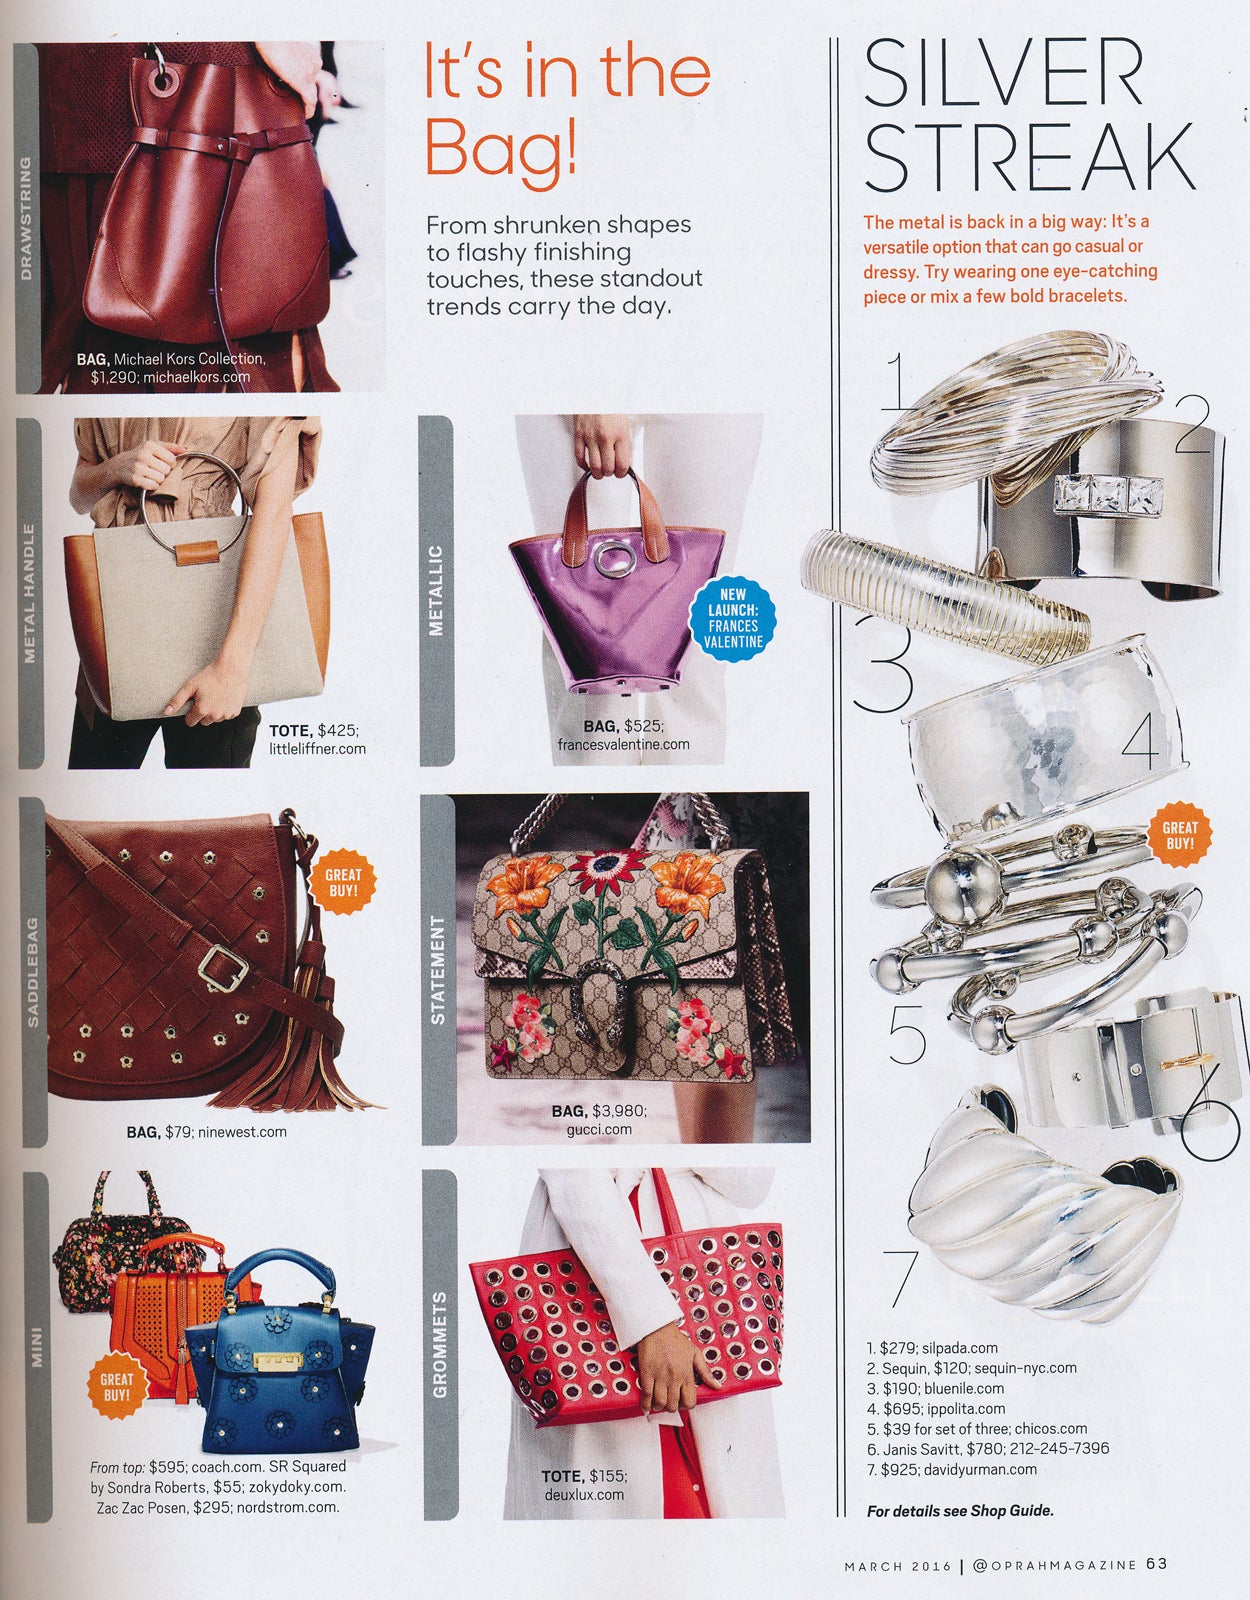 O, The Oprah Magazine - March 2016, featuring Sequin's Carre Cuff